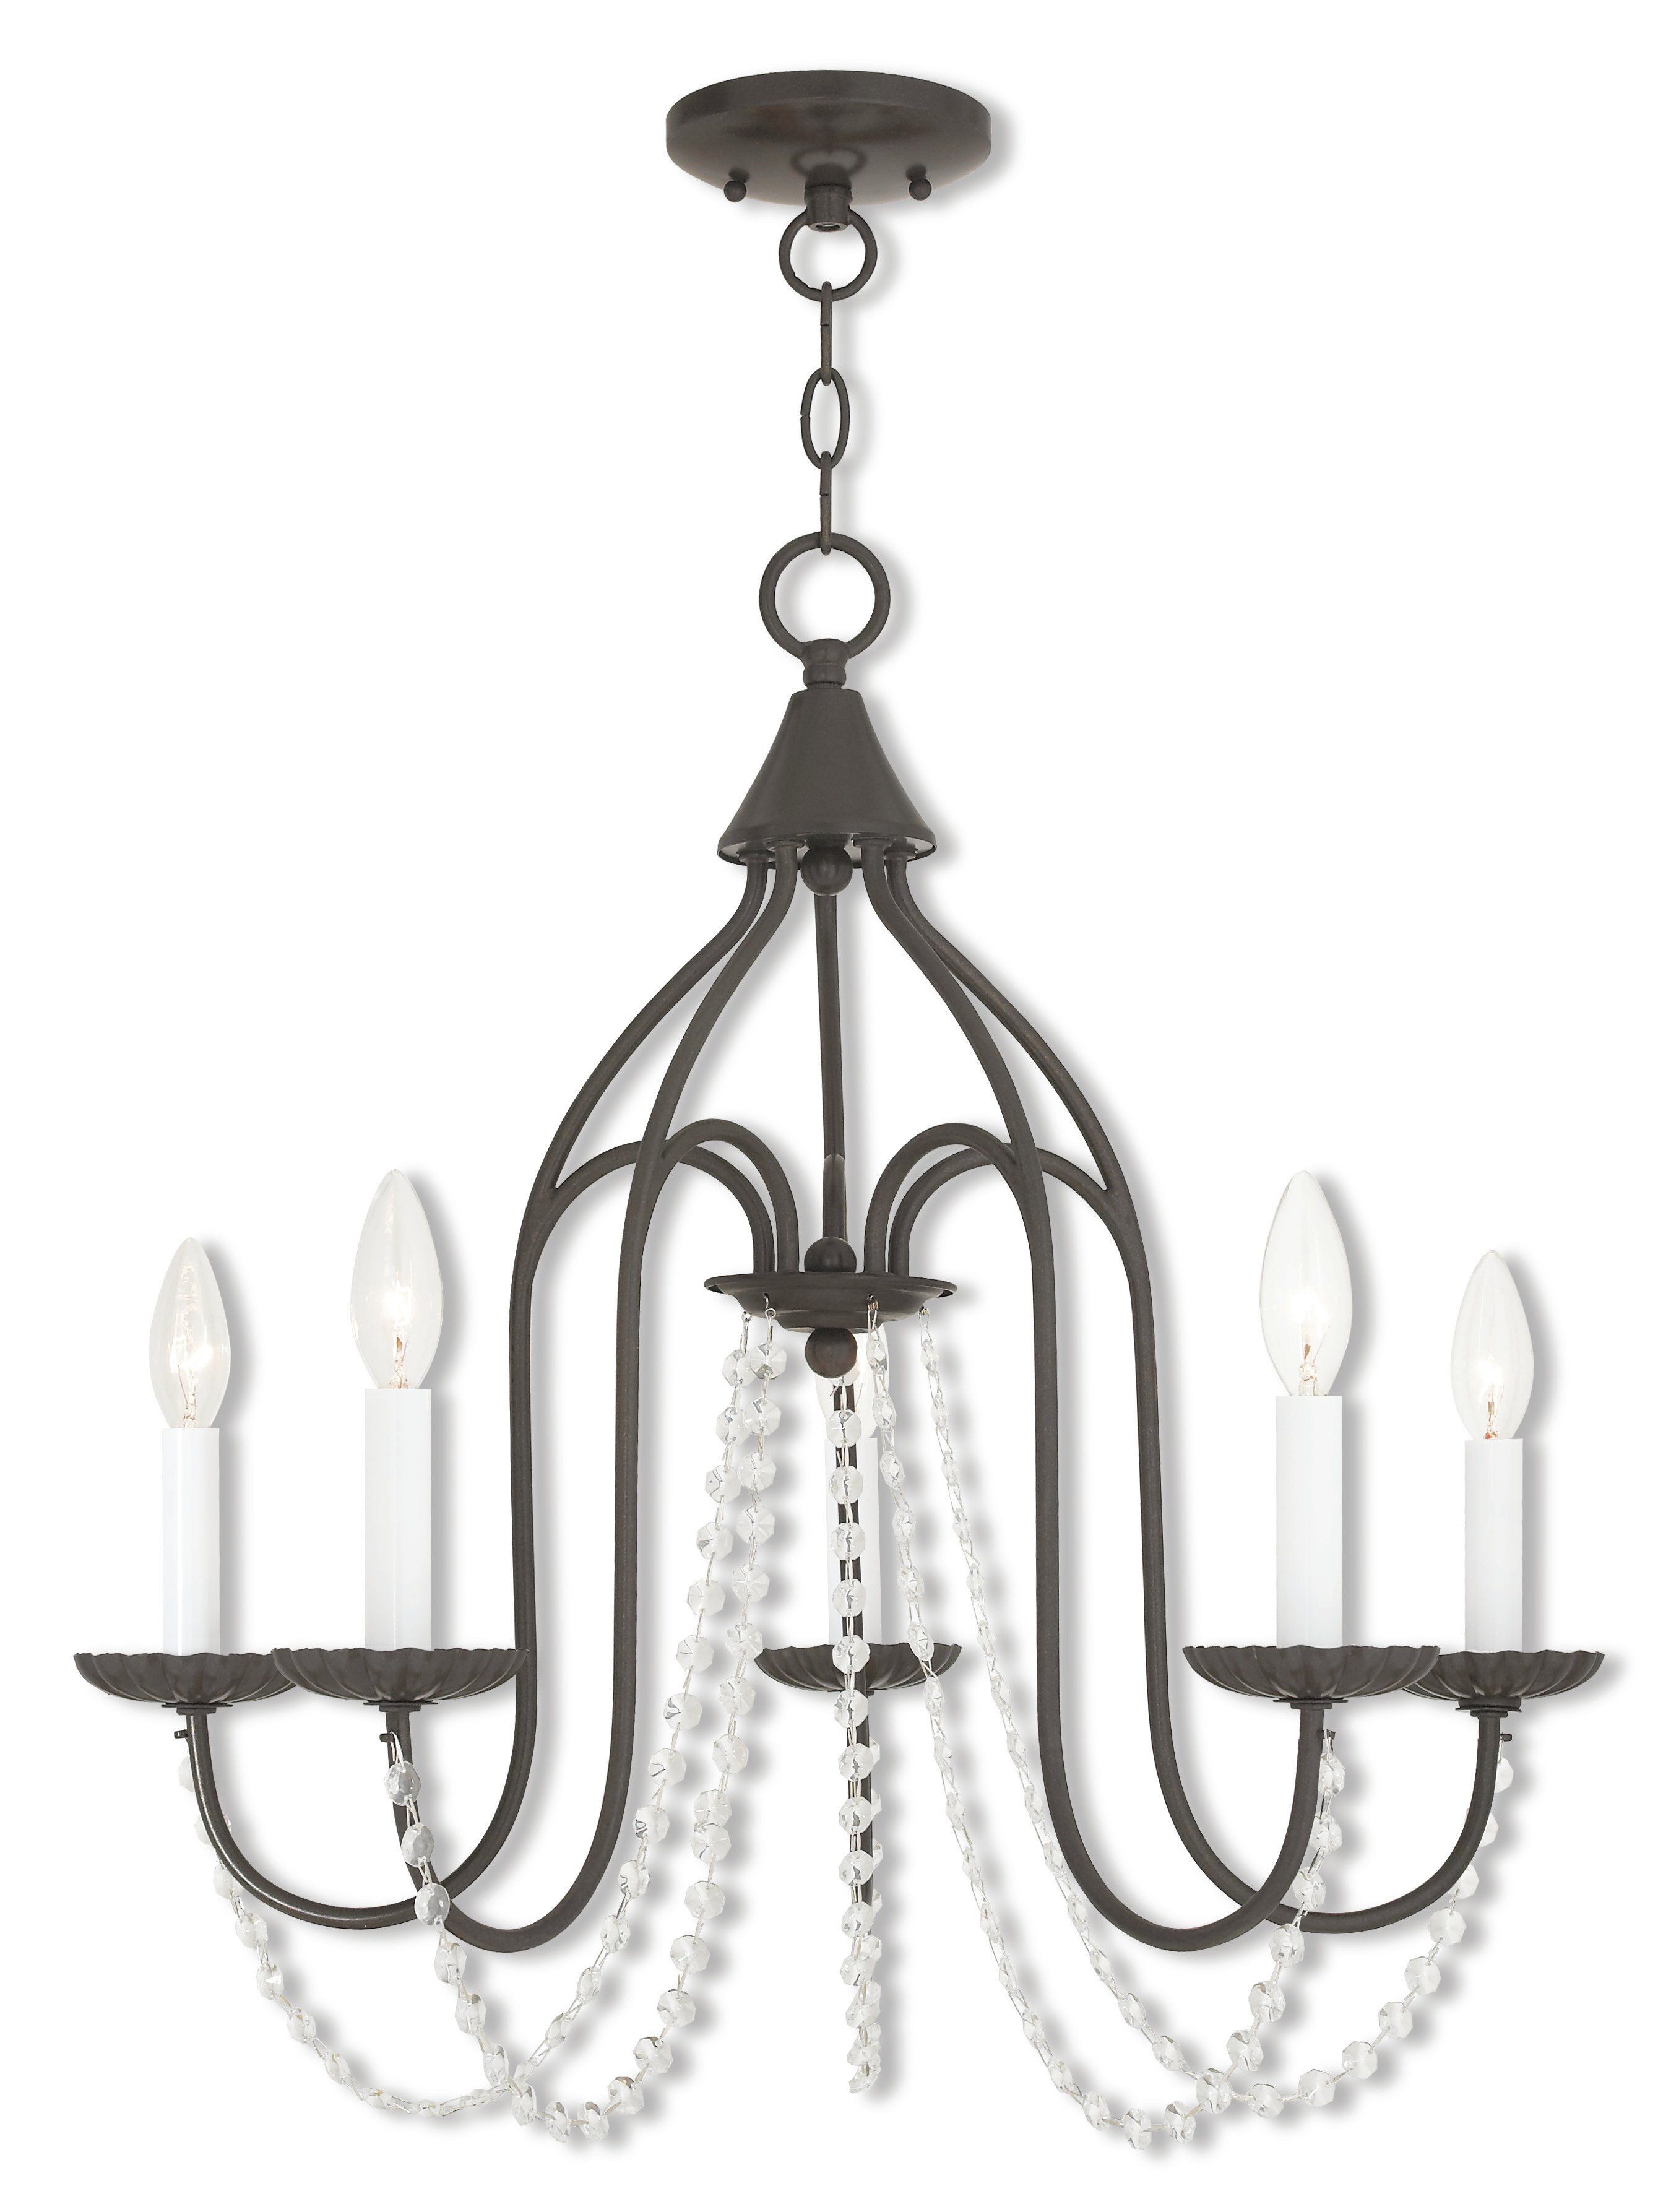 Florentina 5 Light Candle Style Chandelier With Regard To Watford 9 Light Candle Style Chandeliers (View 28 of 30)